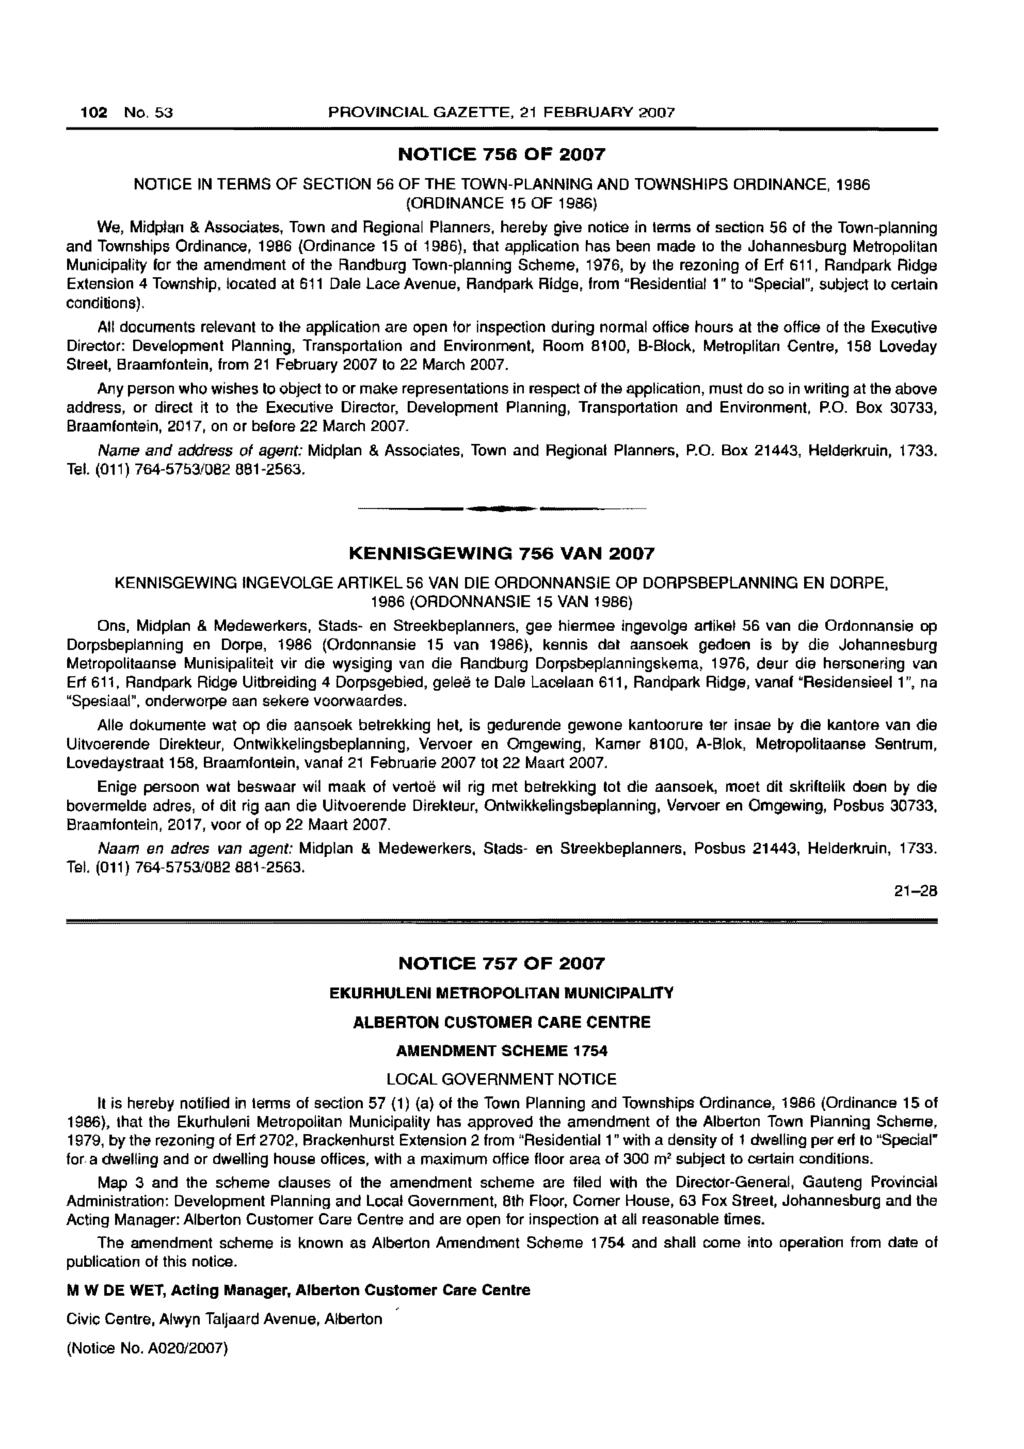 102 NO,53 PROVINCIAL GAZETTE, 21 FEBRUARY 2007 NOTICE 756 OF 2007 NOTICE IN TERMS OF SECTION 56 OF THE TOWN-PLANNING AND TOWNSHIPS ORDINANCE, 1986 (ORDINANCE 15 OF 1986) We, Midplf;ln & Associates,